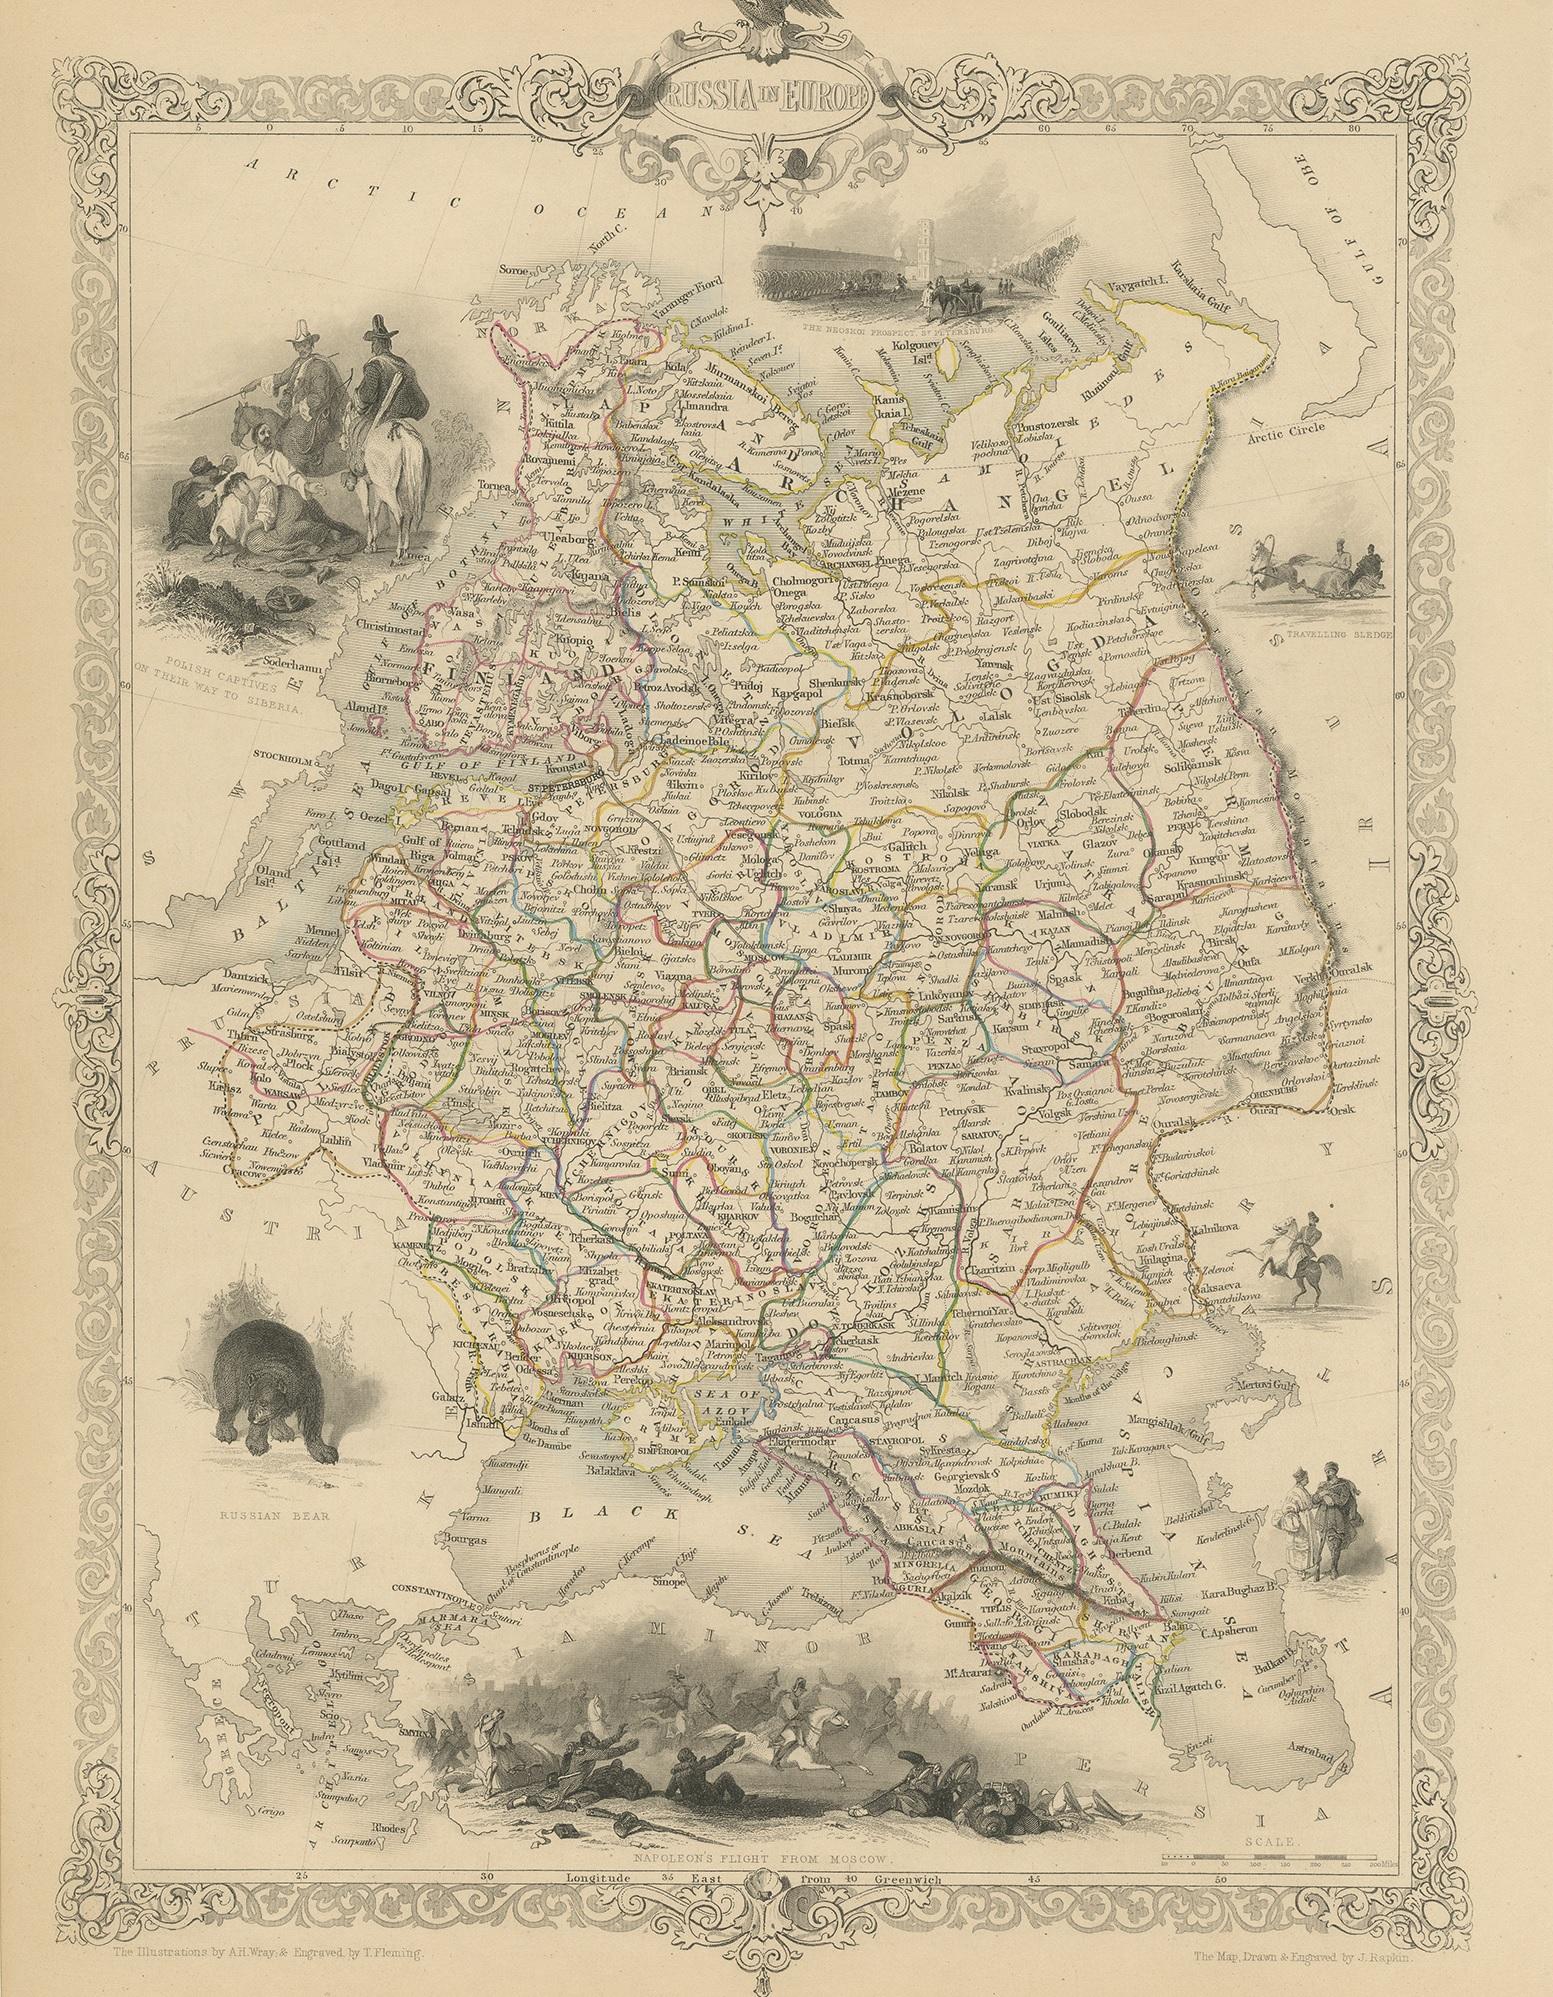 Antique map titled 'Russia in Europe'. Map of European Russia. Showing vignettes of the Neoskoi Prospect, St. Petersburg, Polish Captives on their way to Siberia, a Russian Bear, Russian Horseman, Travelling Sledge, costumed Russians, and Napoleon's